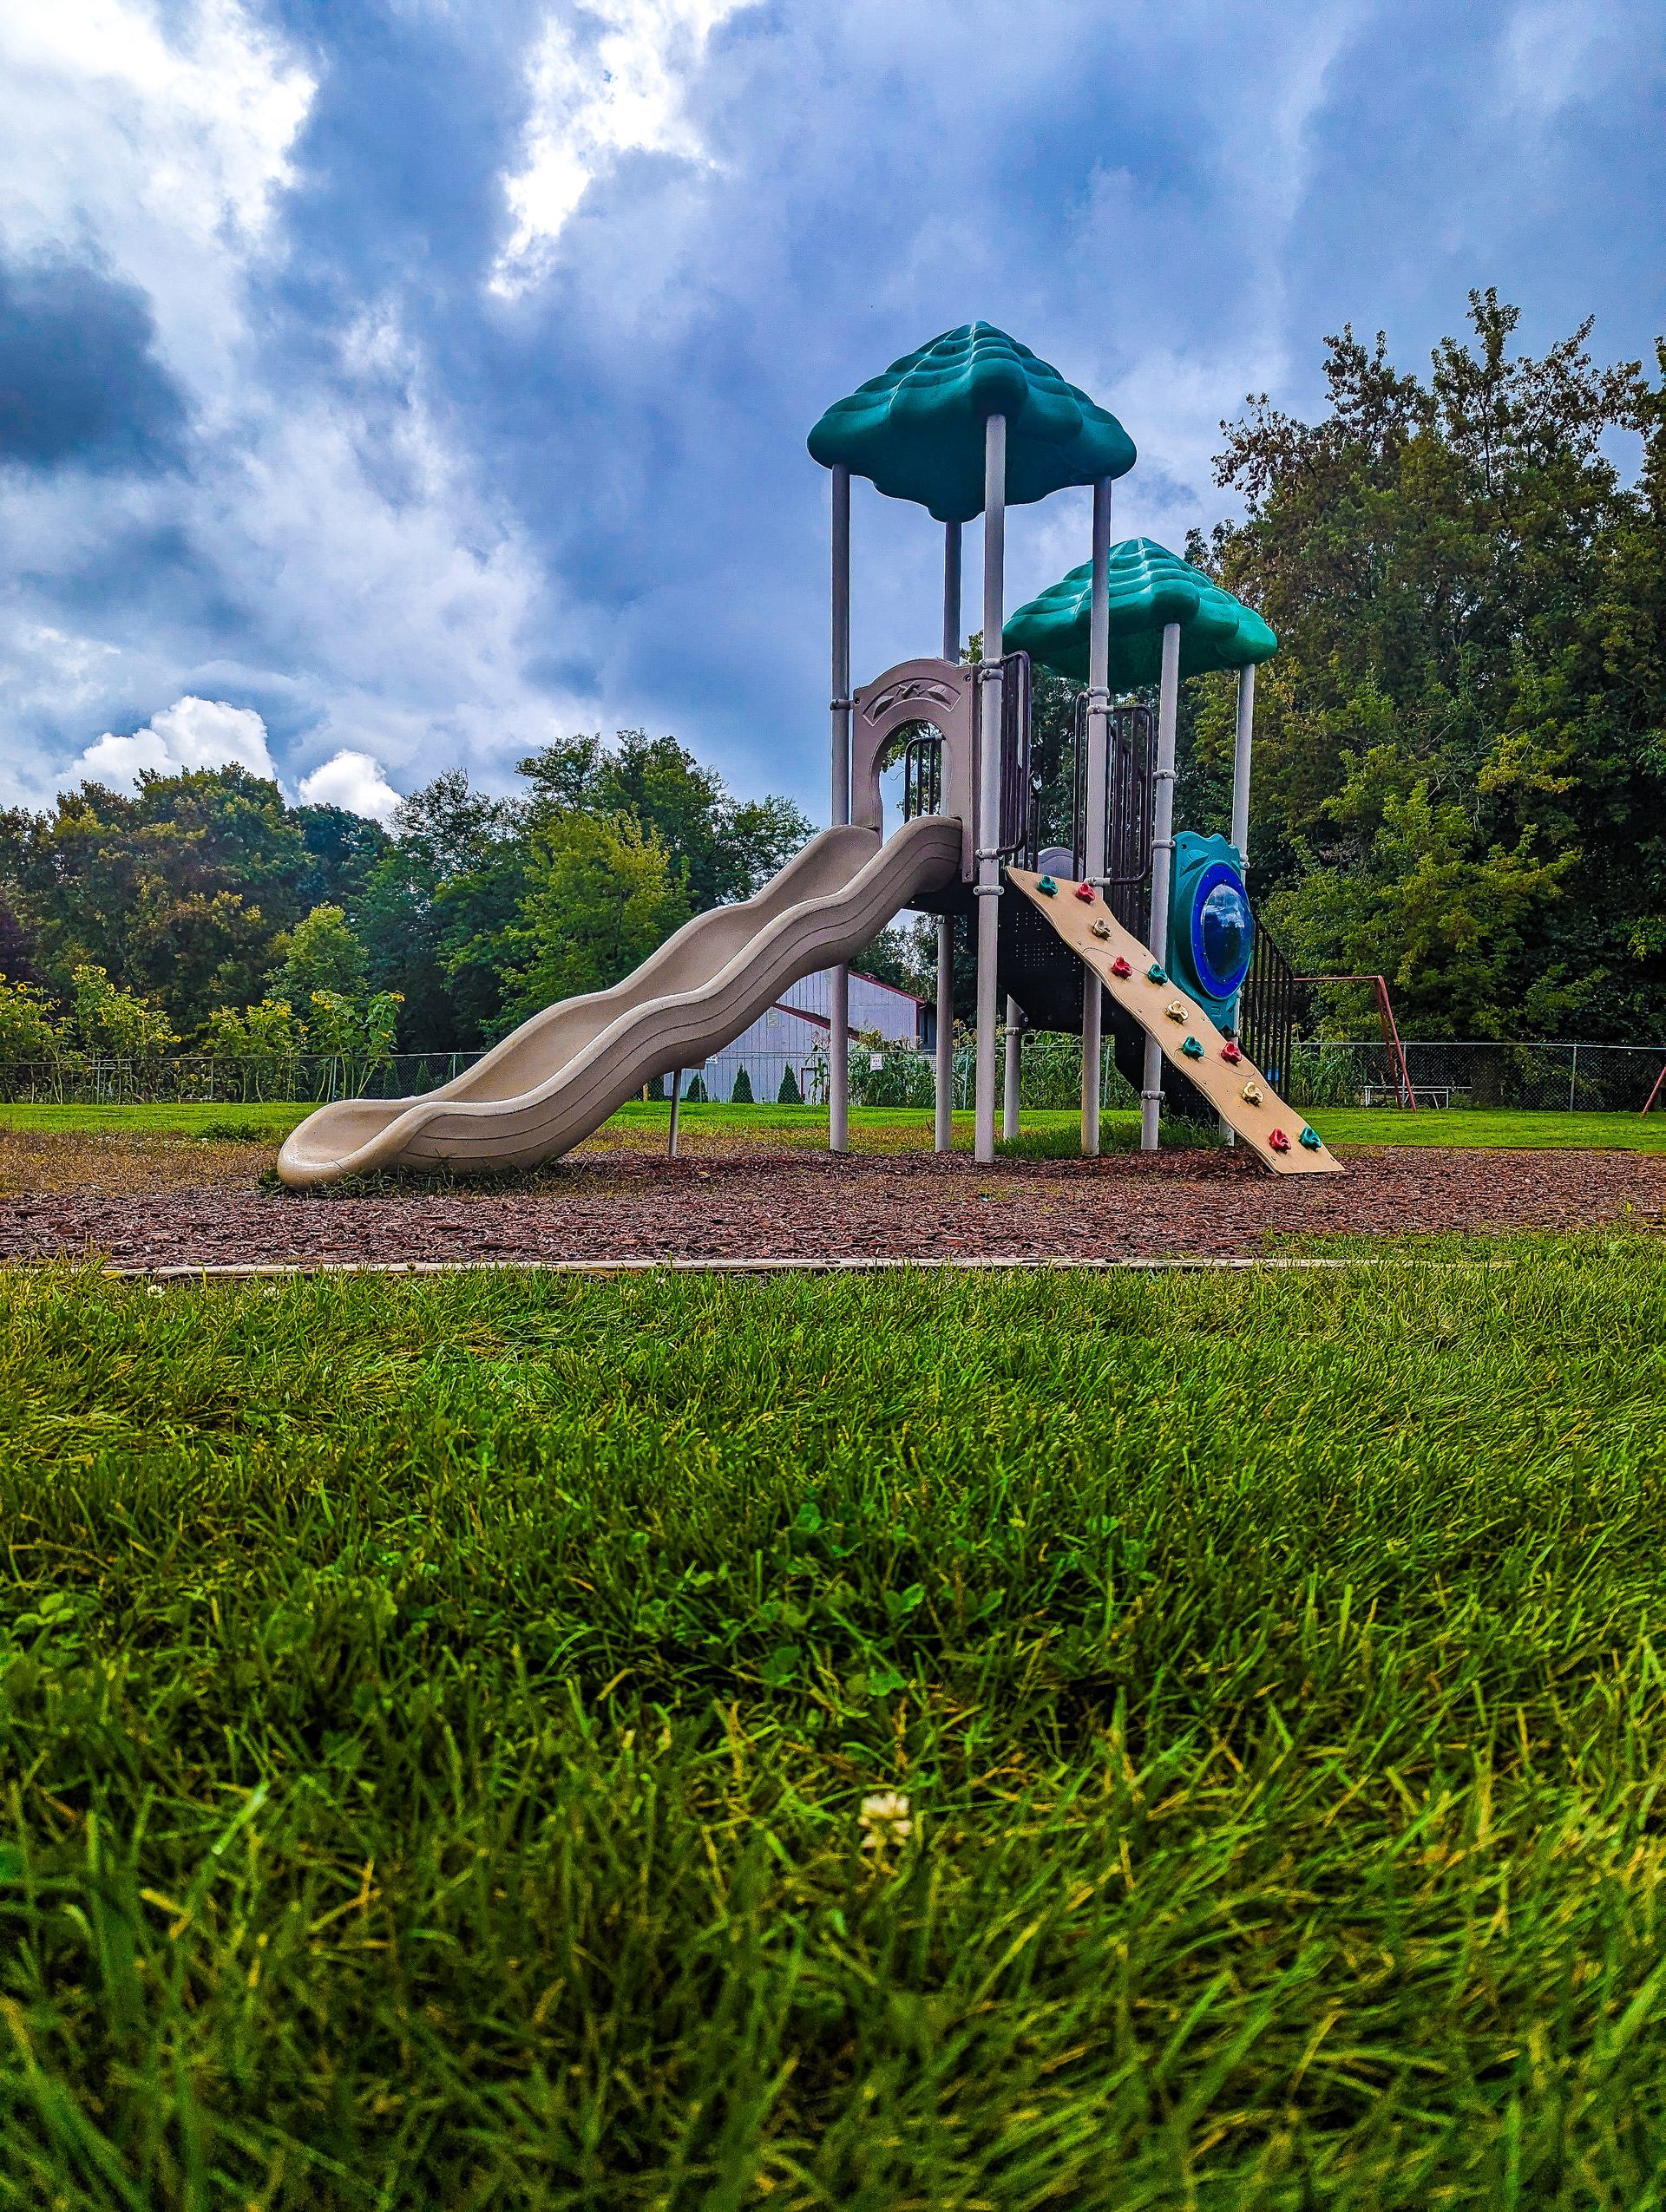 A playground with a slide and a climbing wall in a park.